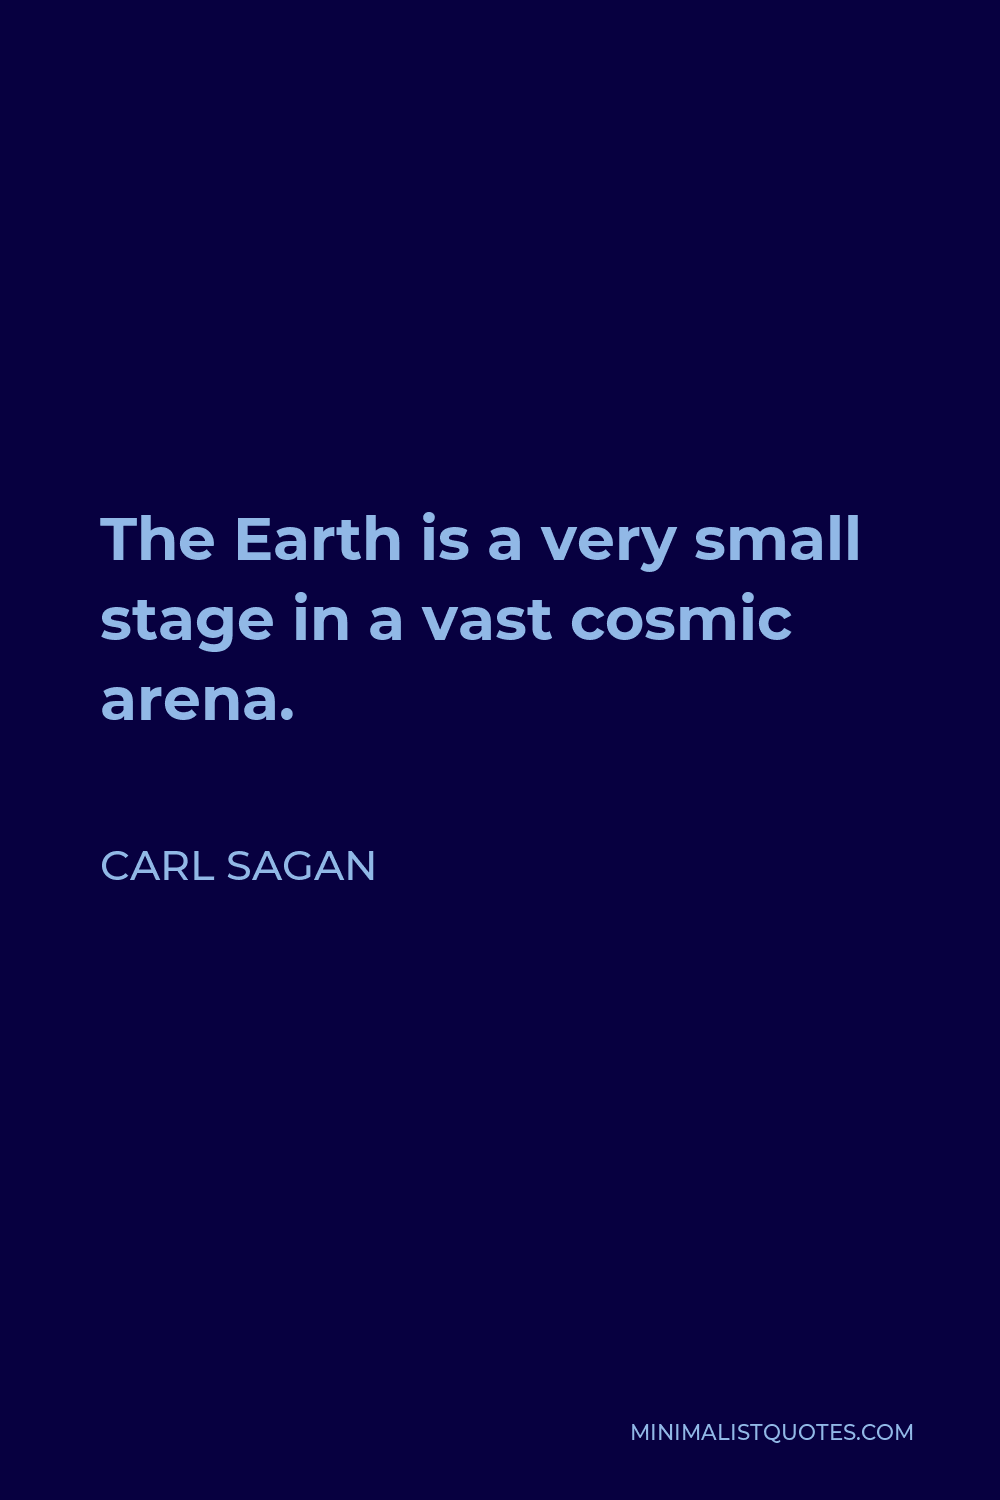 Carl Sagan Quote - The Earth is a very small stage in a vast cosmic arena.